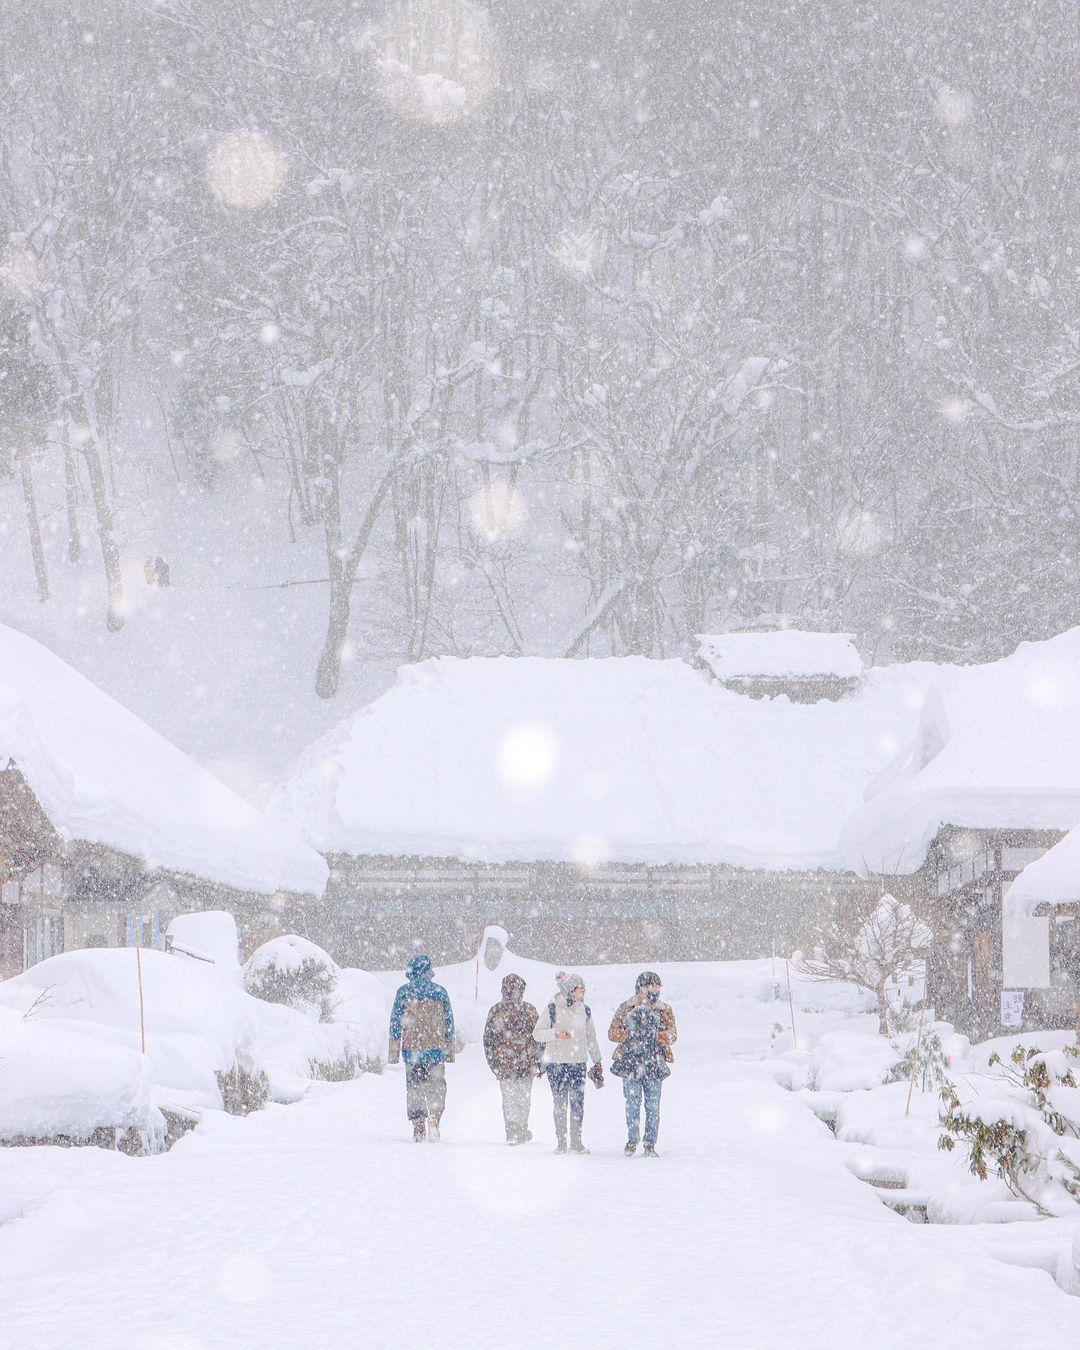 Cities in Japan to see snow - visitors walking in the snow in Ouchi-Juku